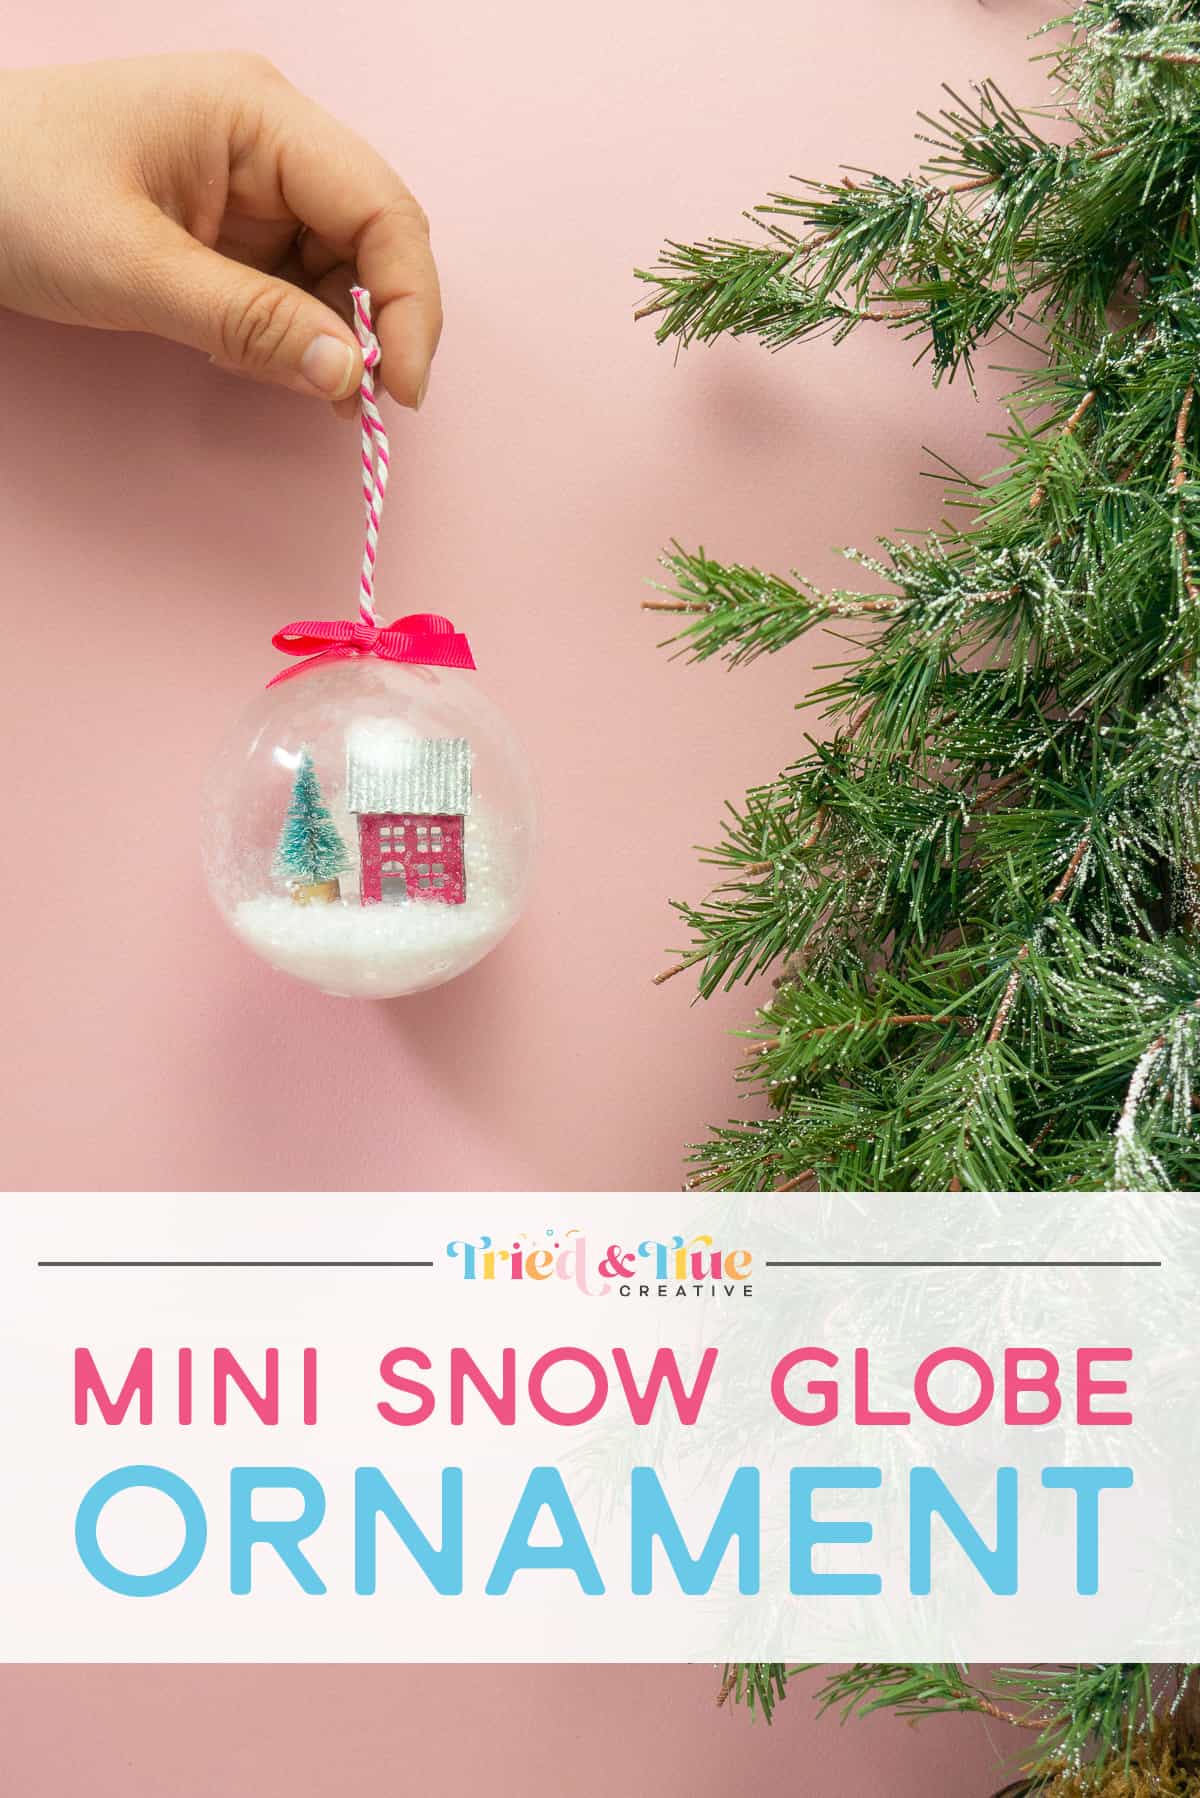 Hand holding a mini snow globe ornament next to greenery with words.